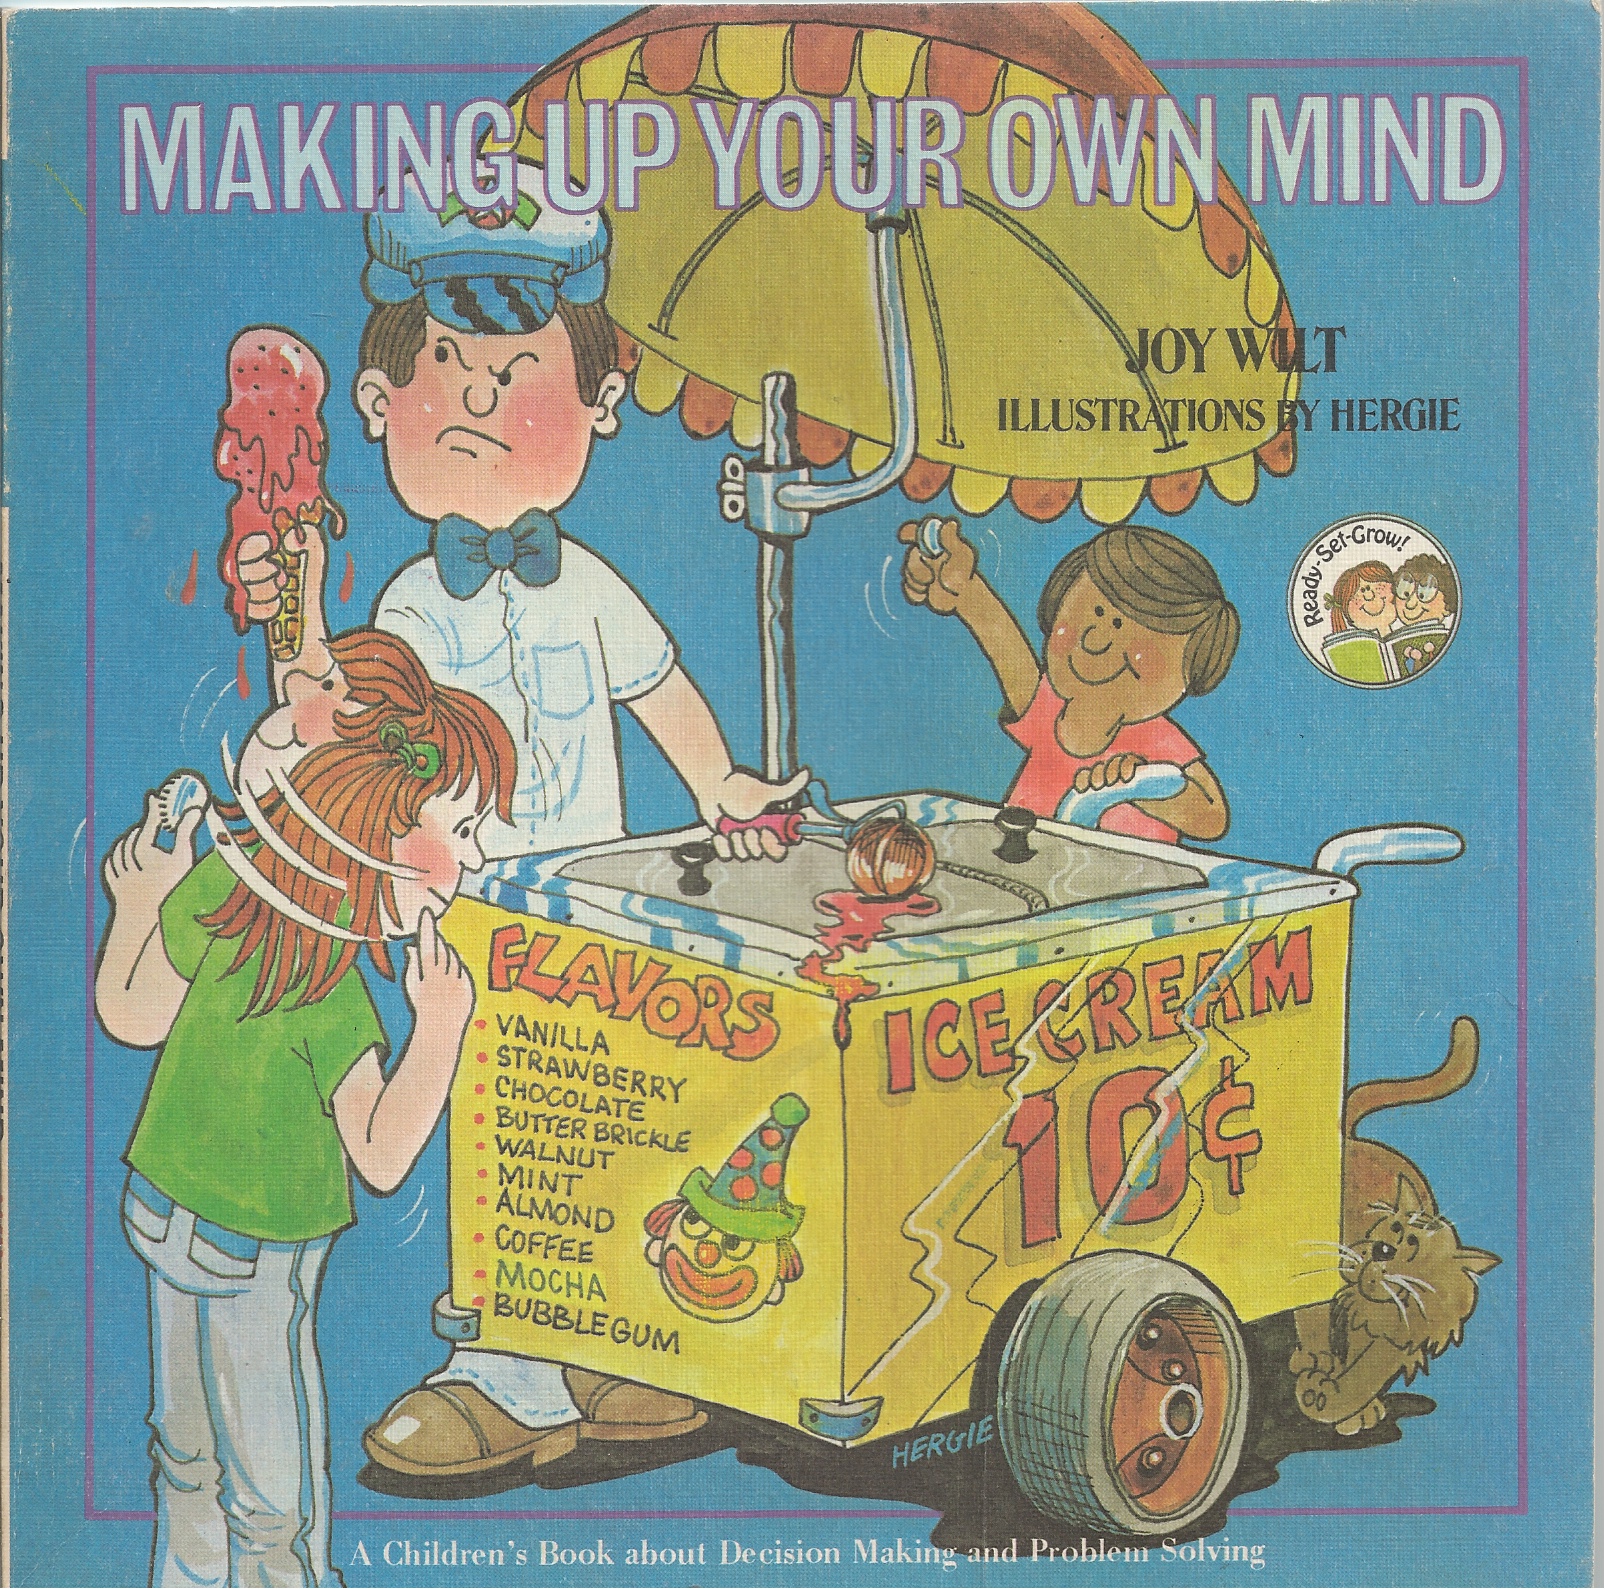 WILT JOY - Making Up Your Own Mind: A Children's Book About Decision Making and Problem Solving.